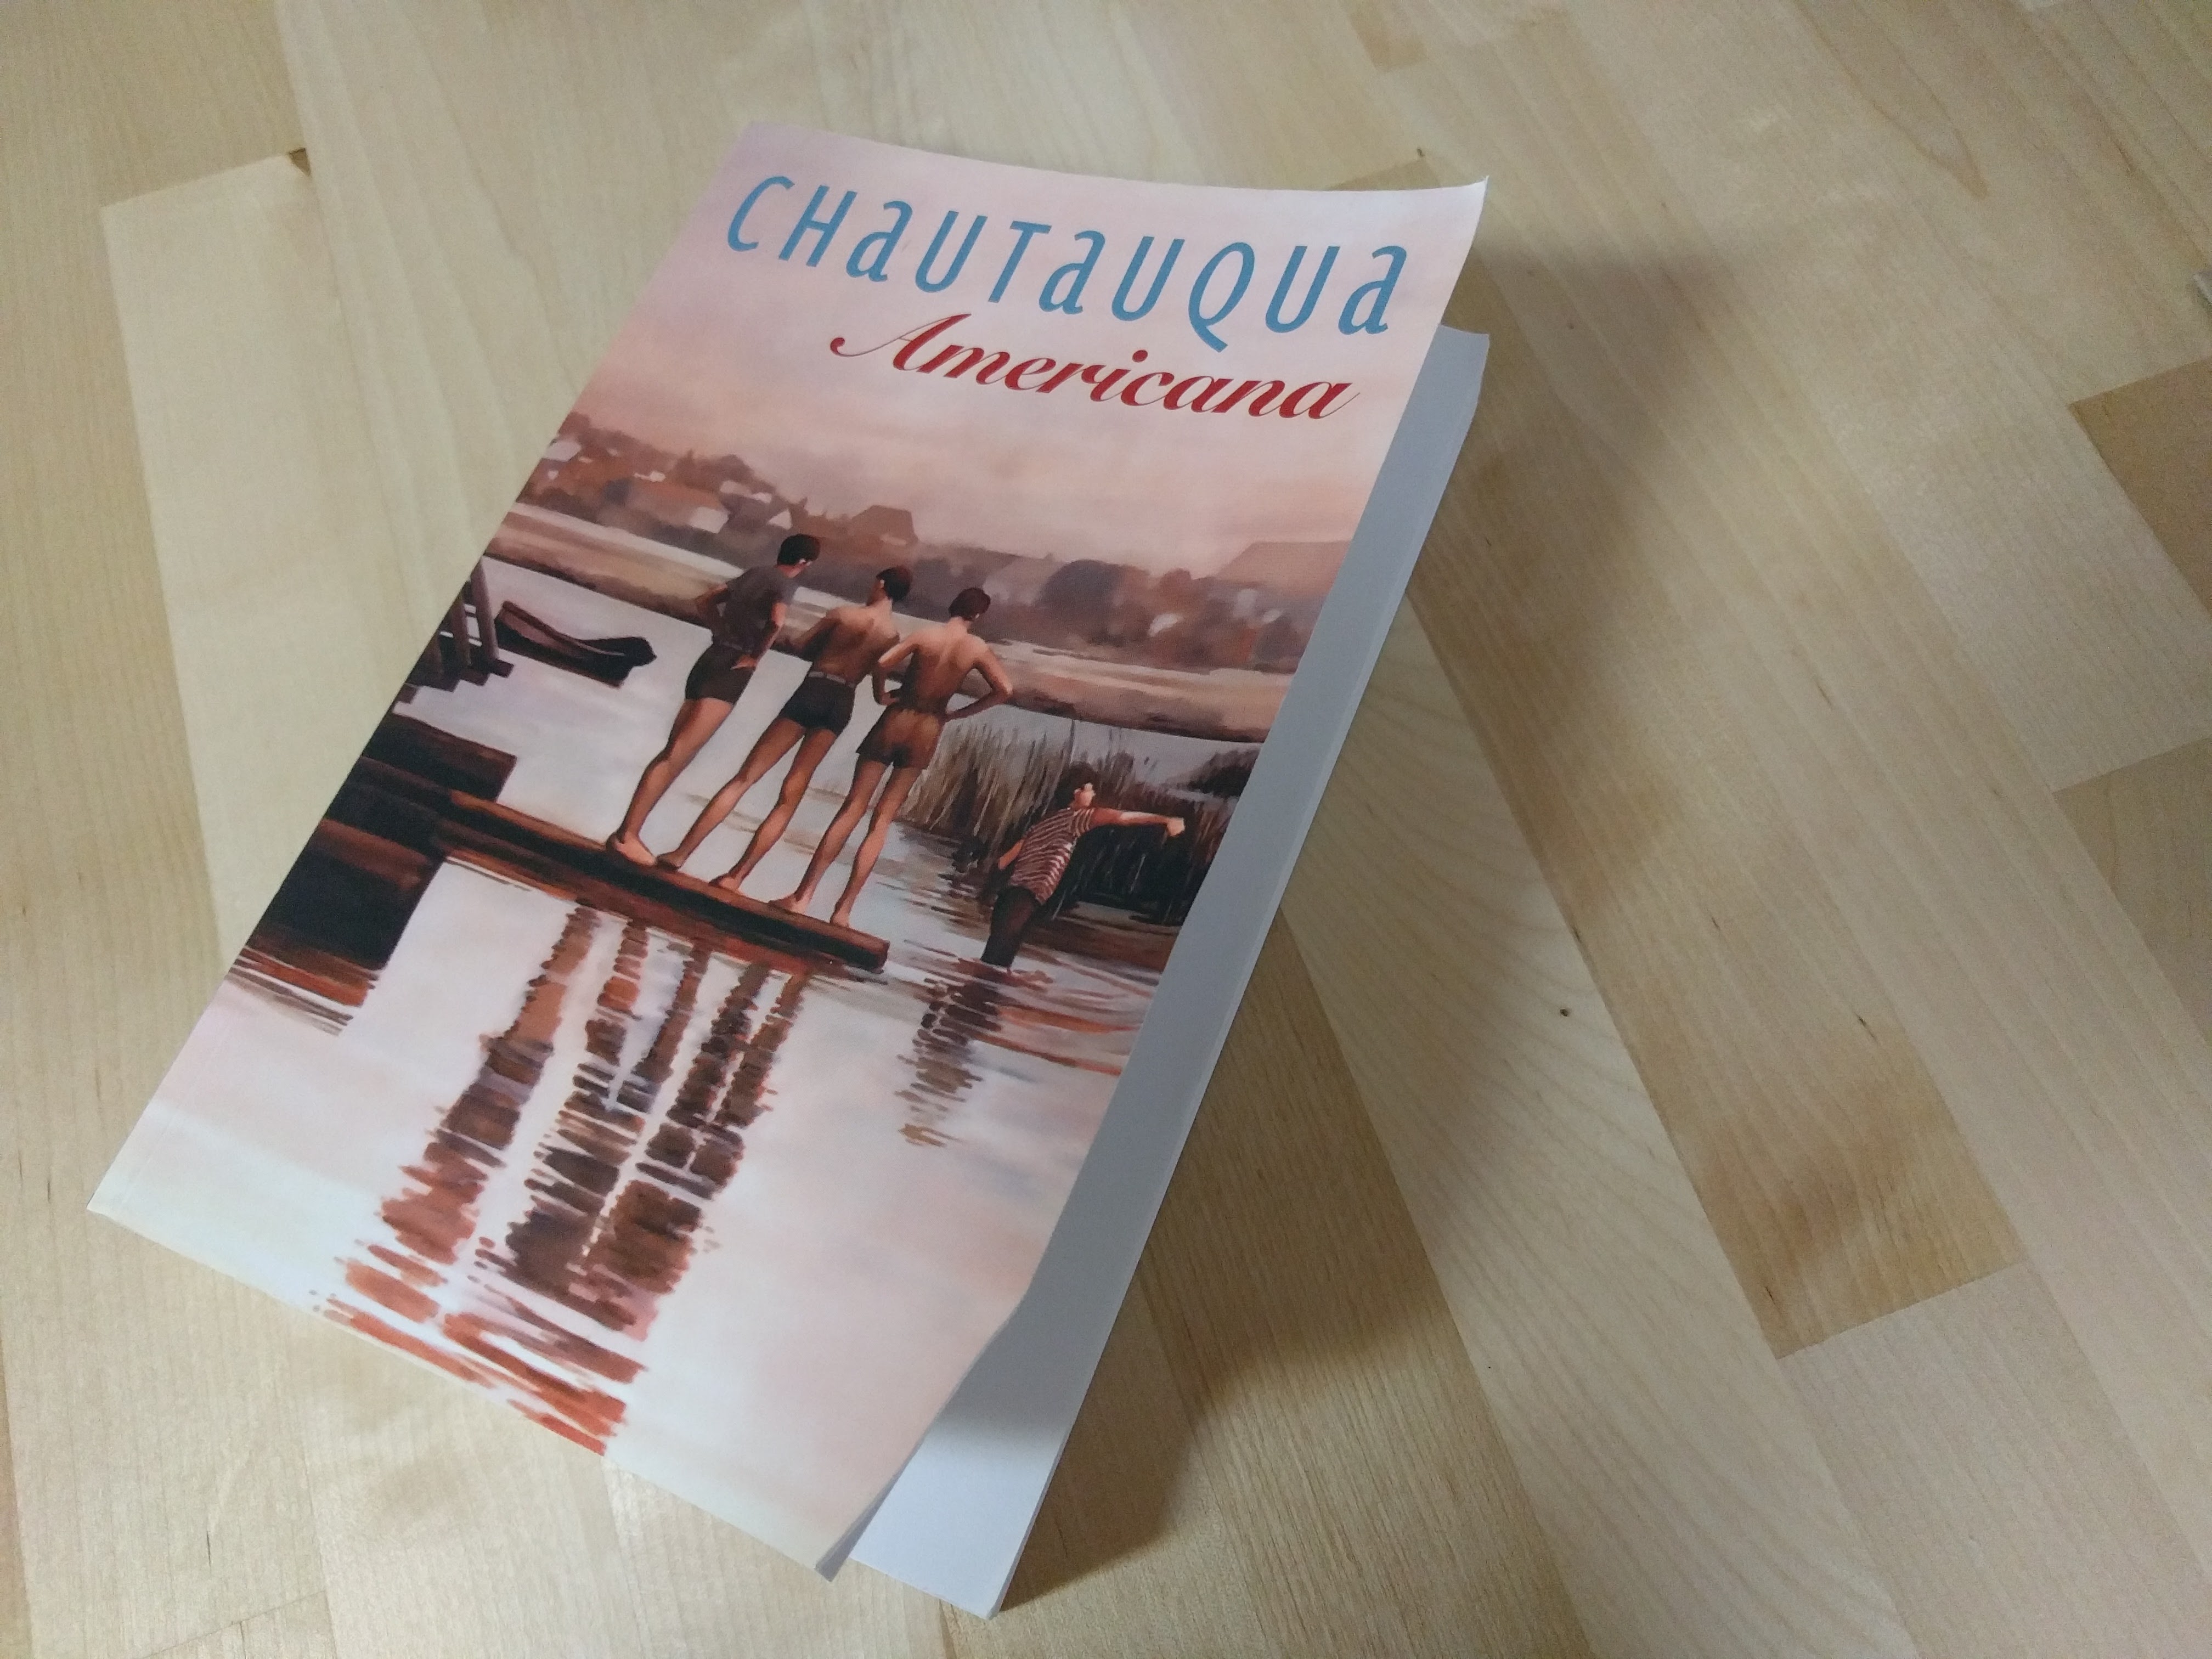 This great issue of Chautauqua Americana published a ton of great essays.